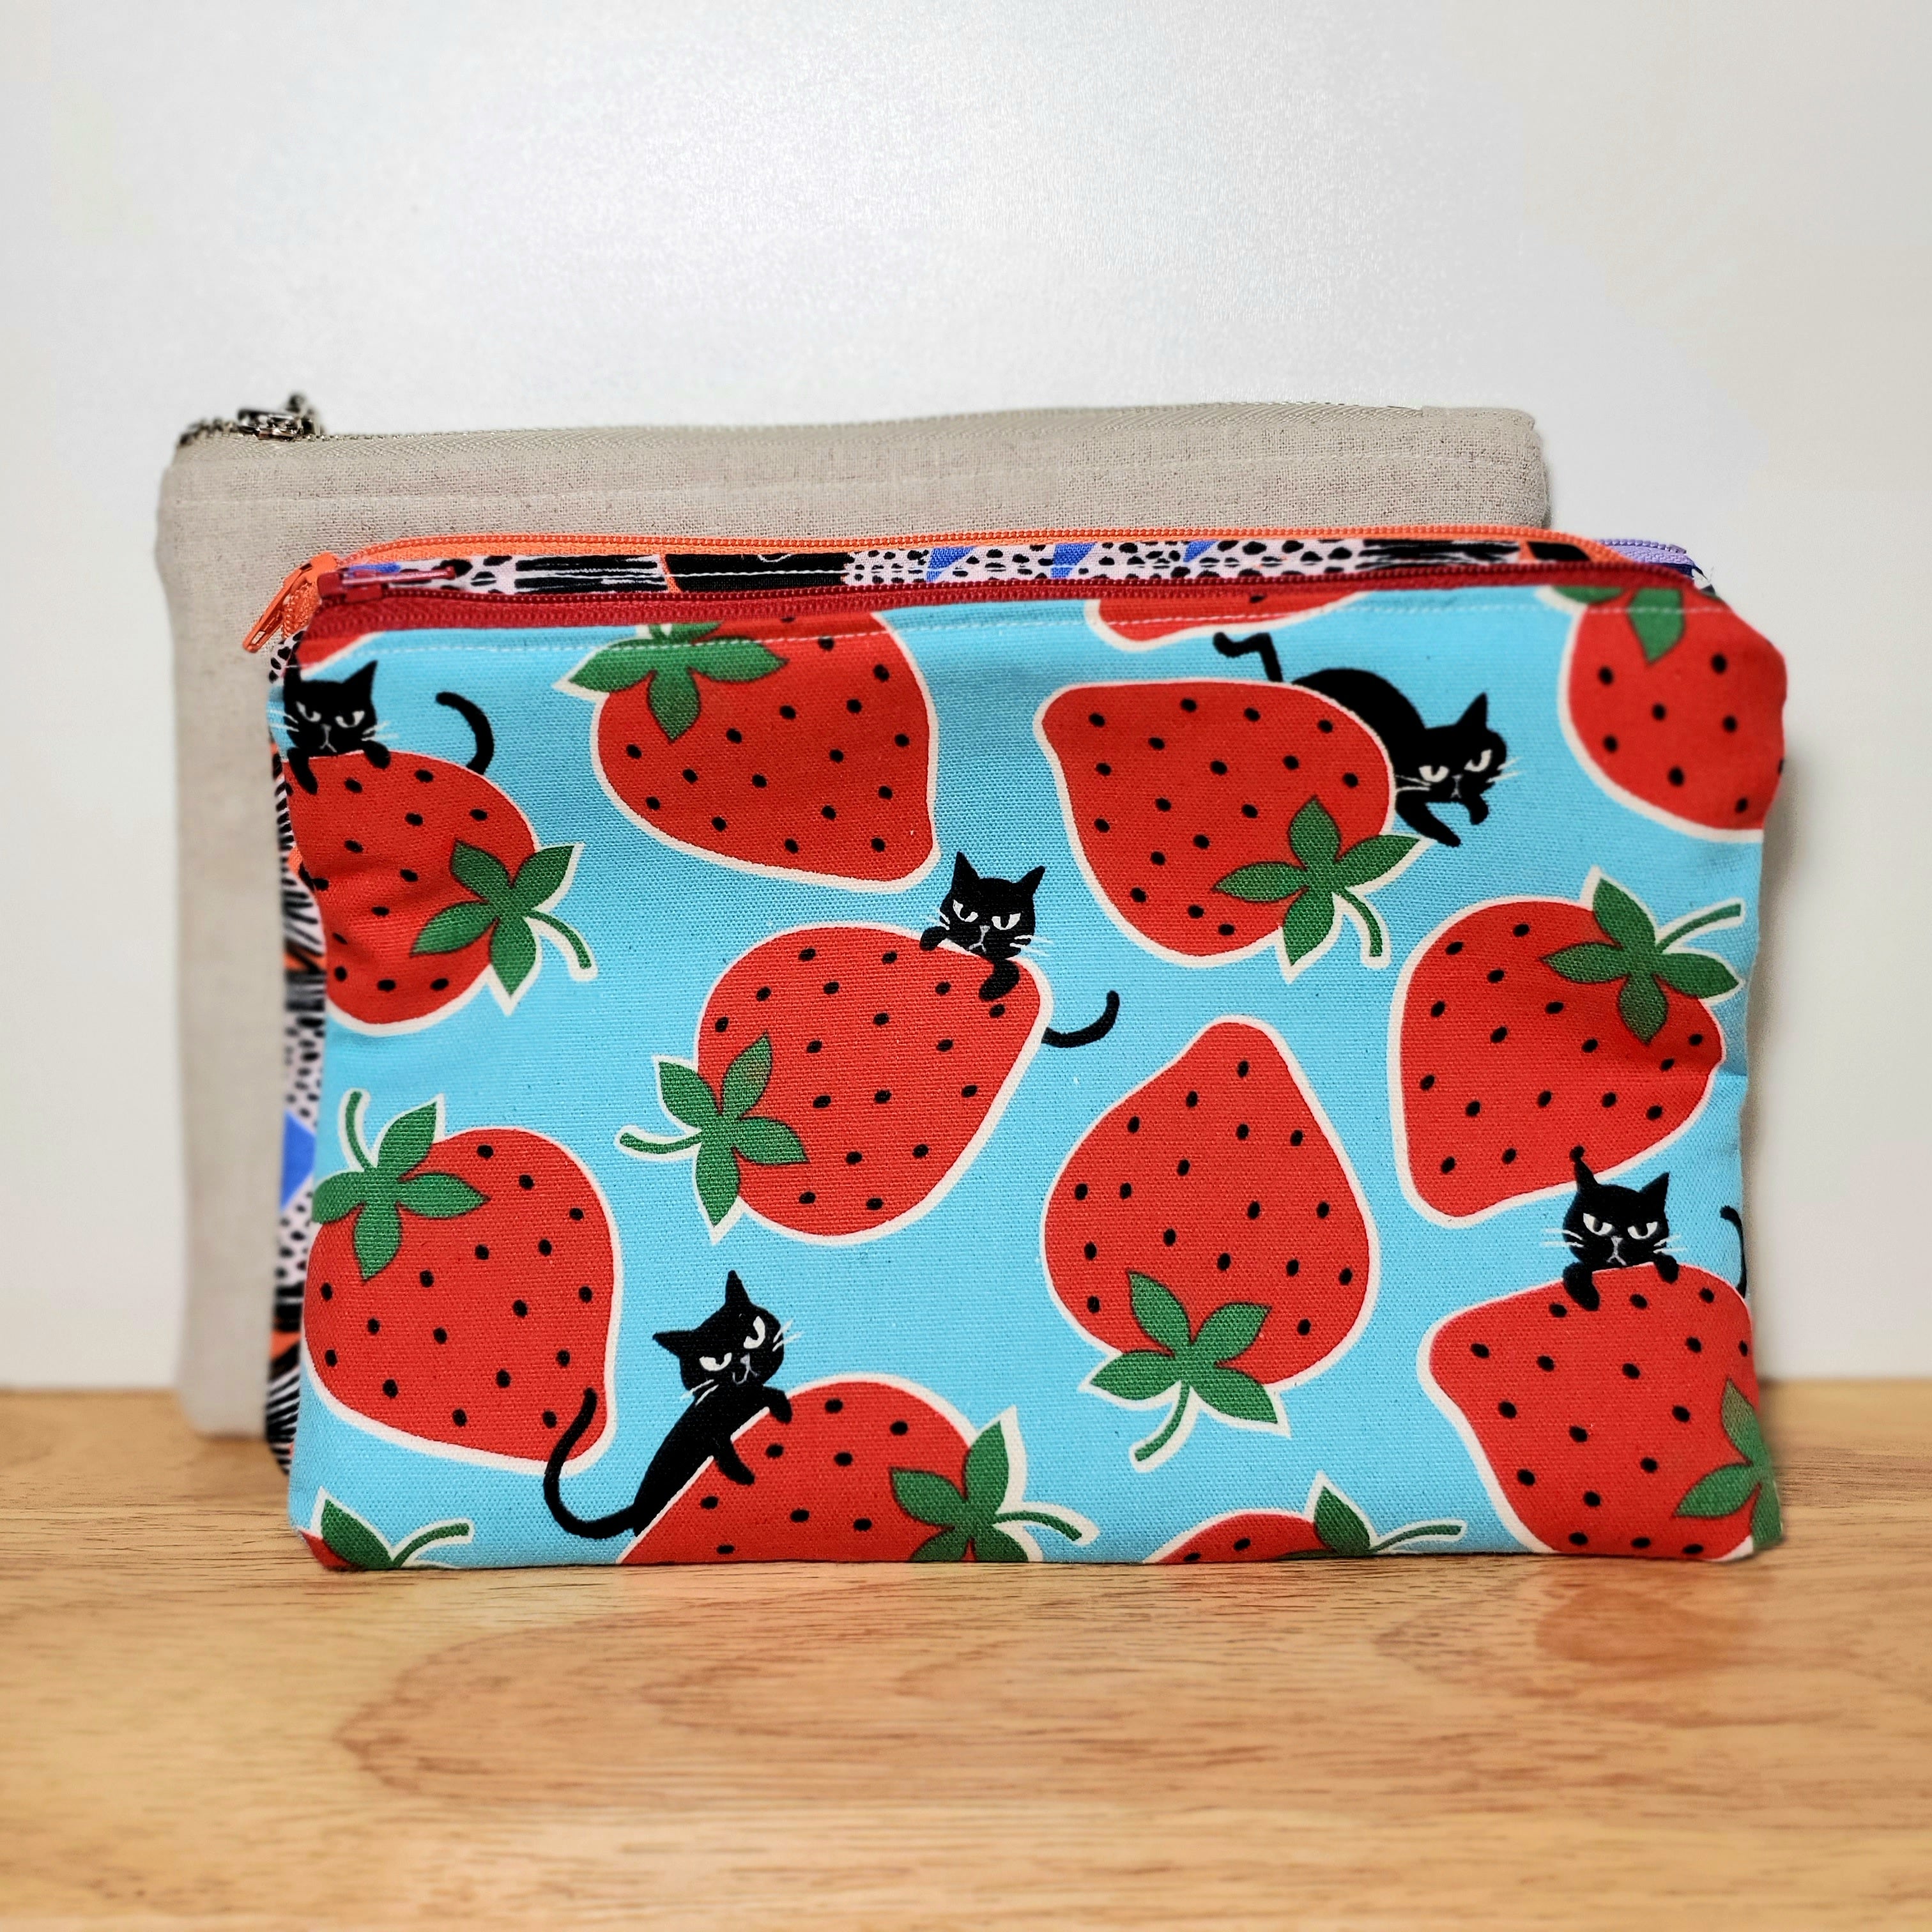 Sewing a zipper pouch - No Pattern Needed